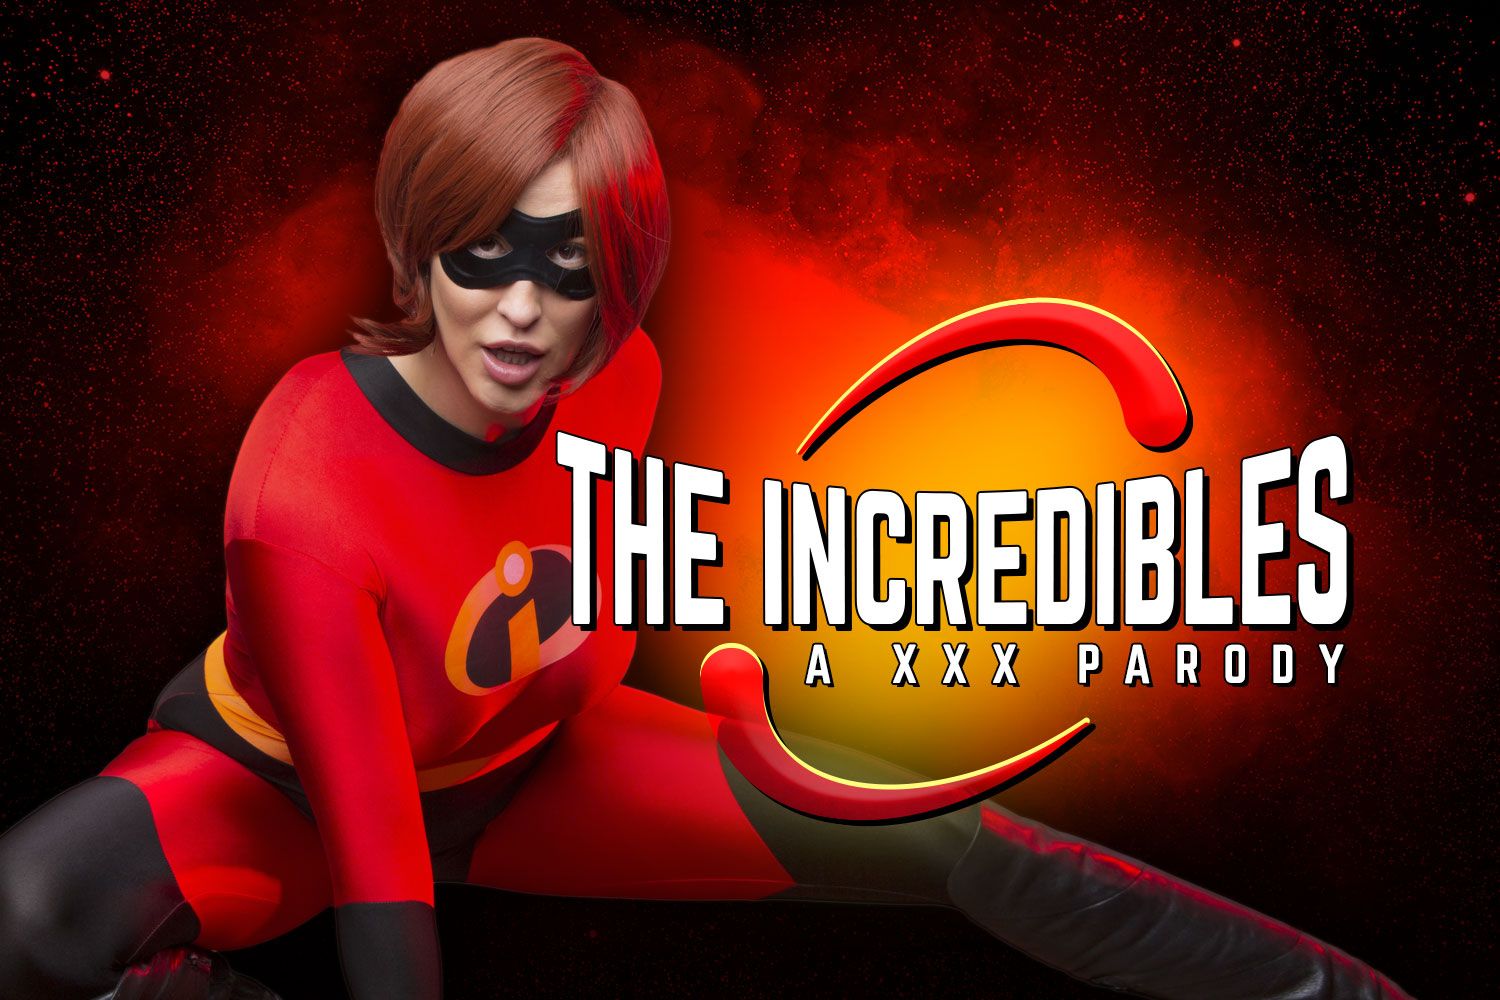 The incredibles parody